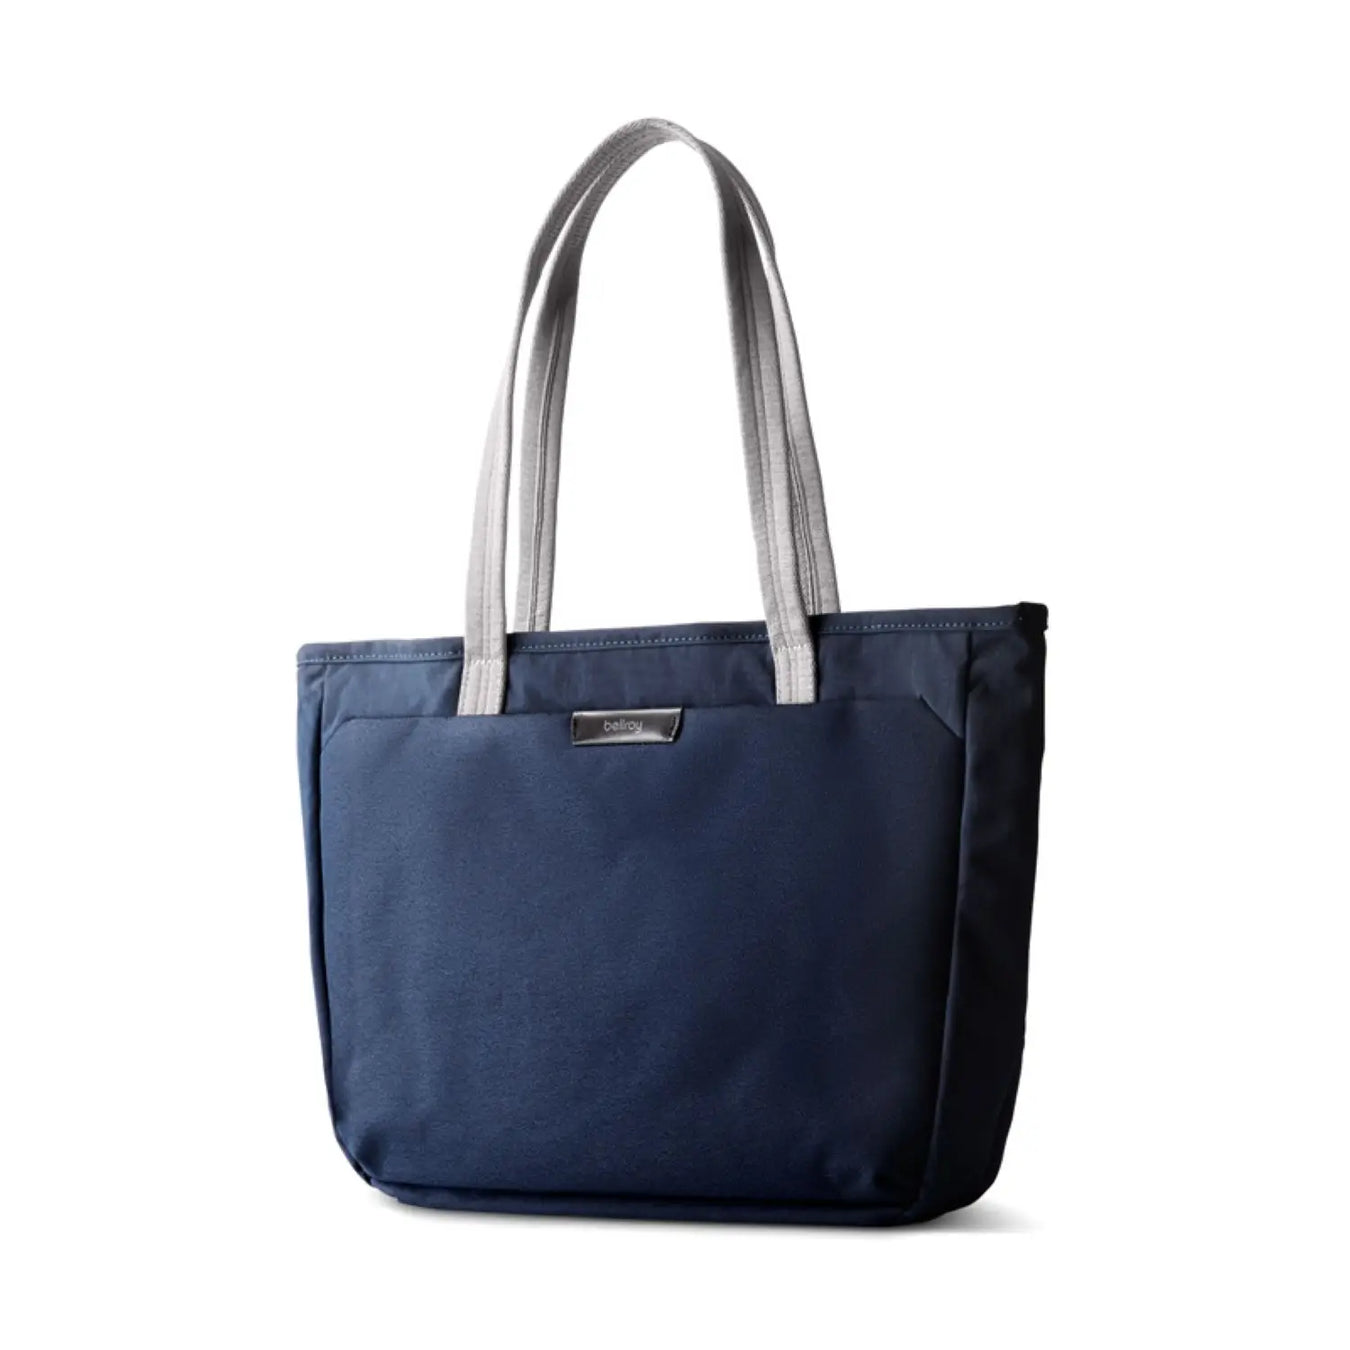 Bellroy's Tote Bags